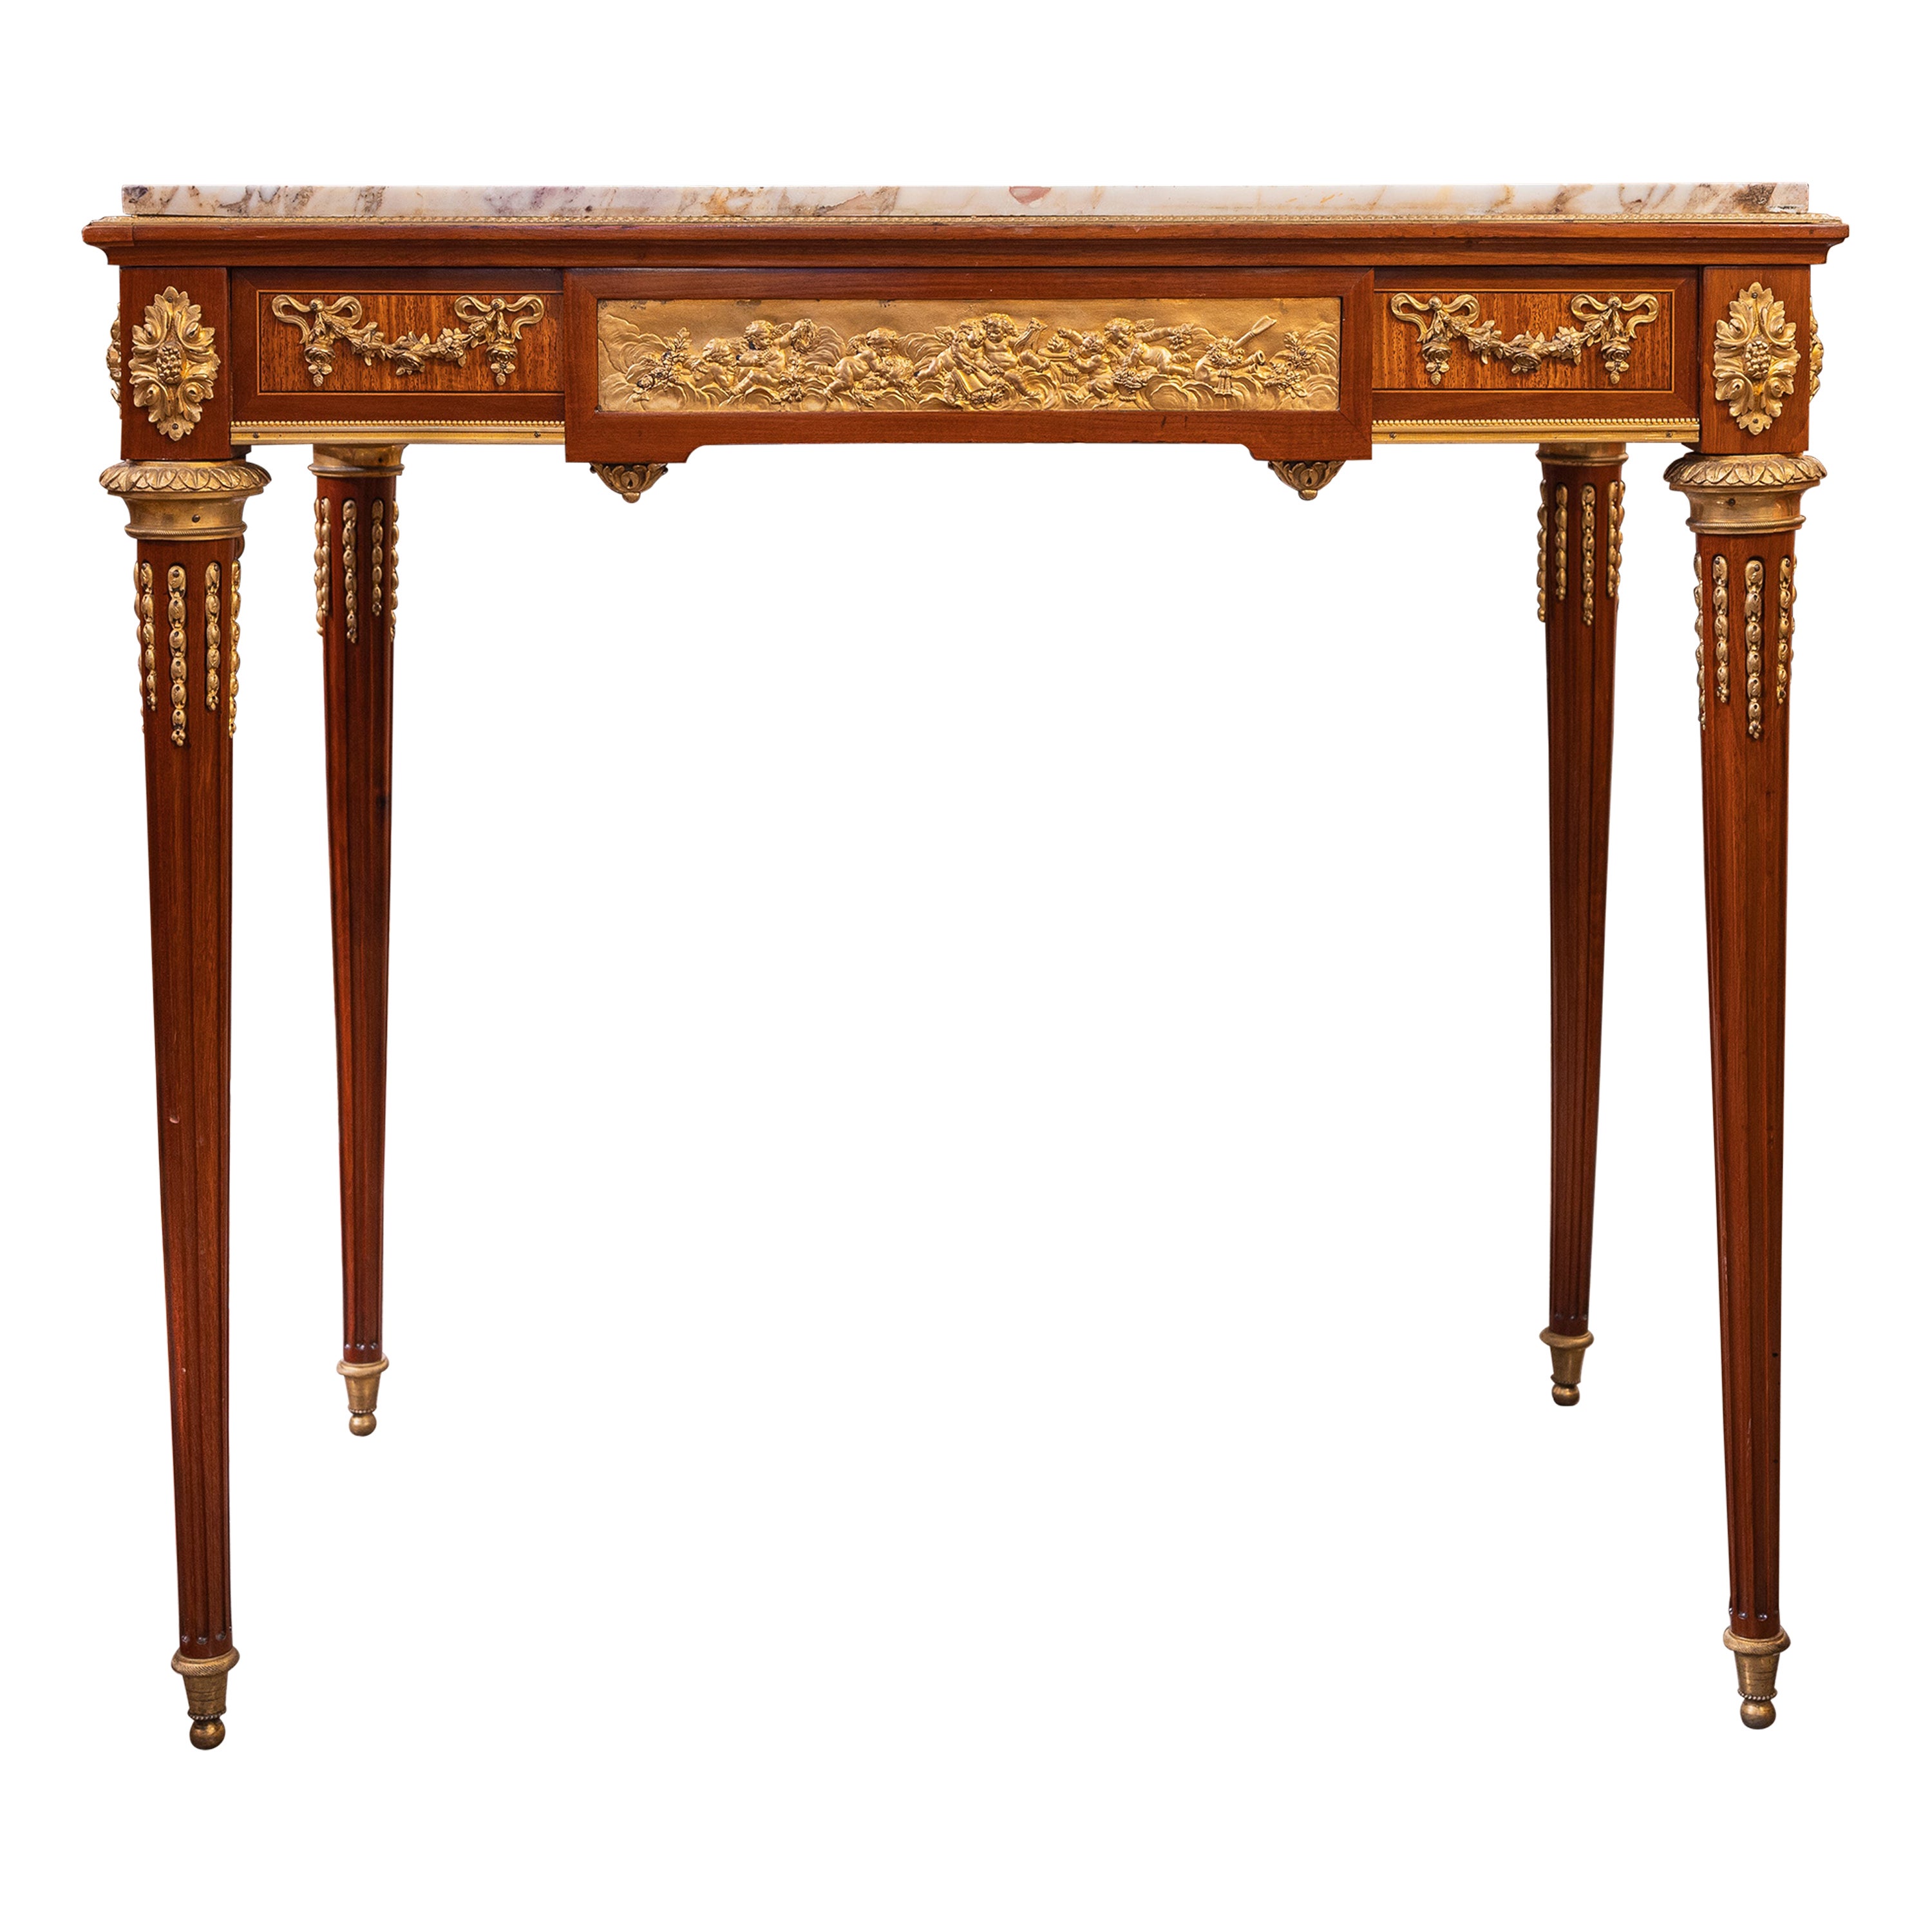 A very fine 19th c French Louis XVI signed marble top and gilt bronze table For Sale